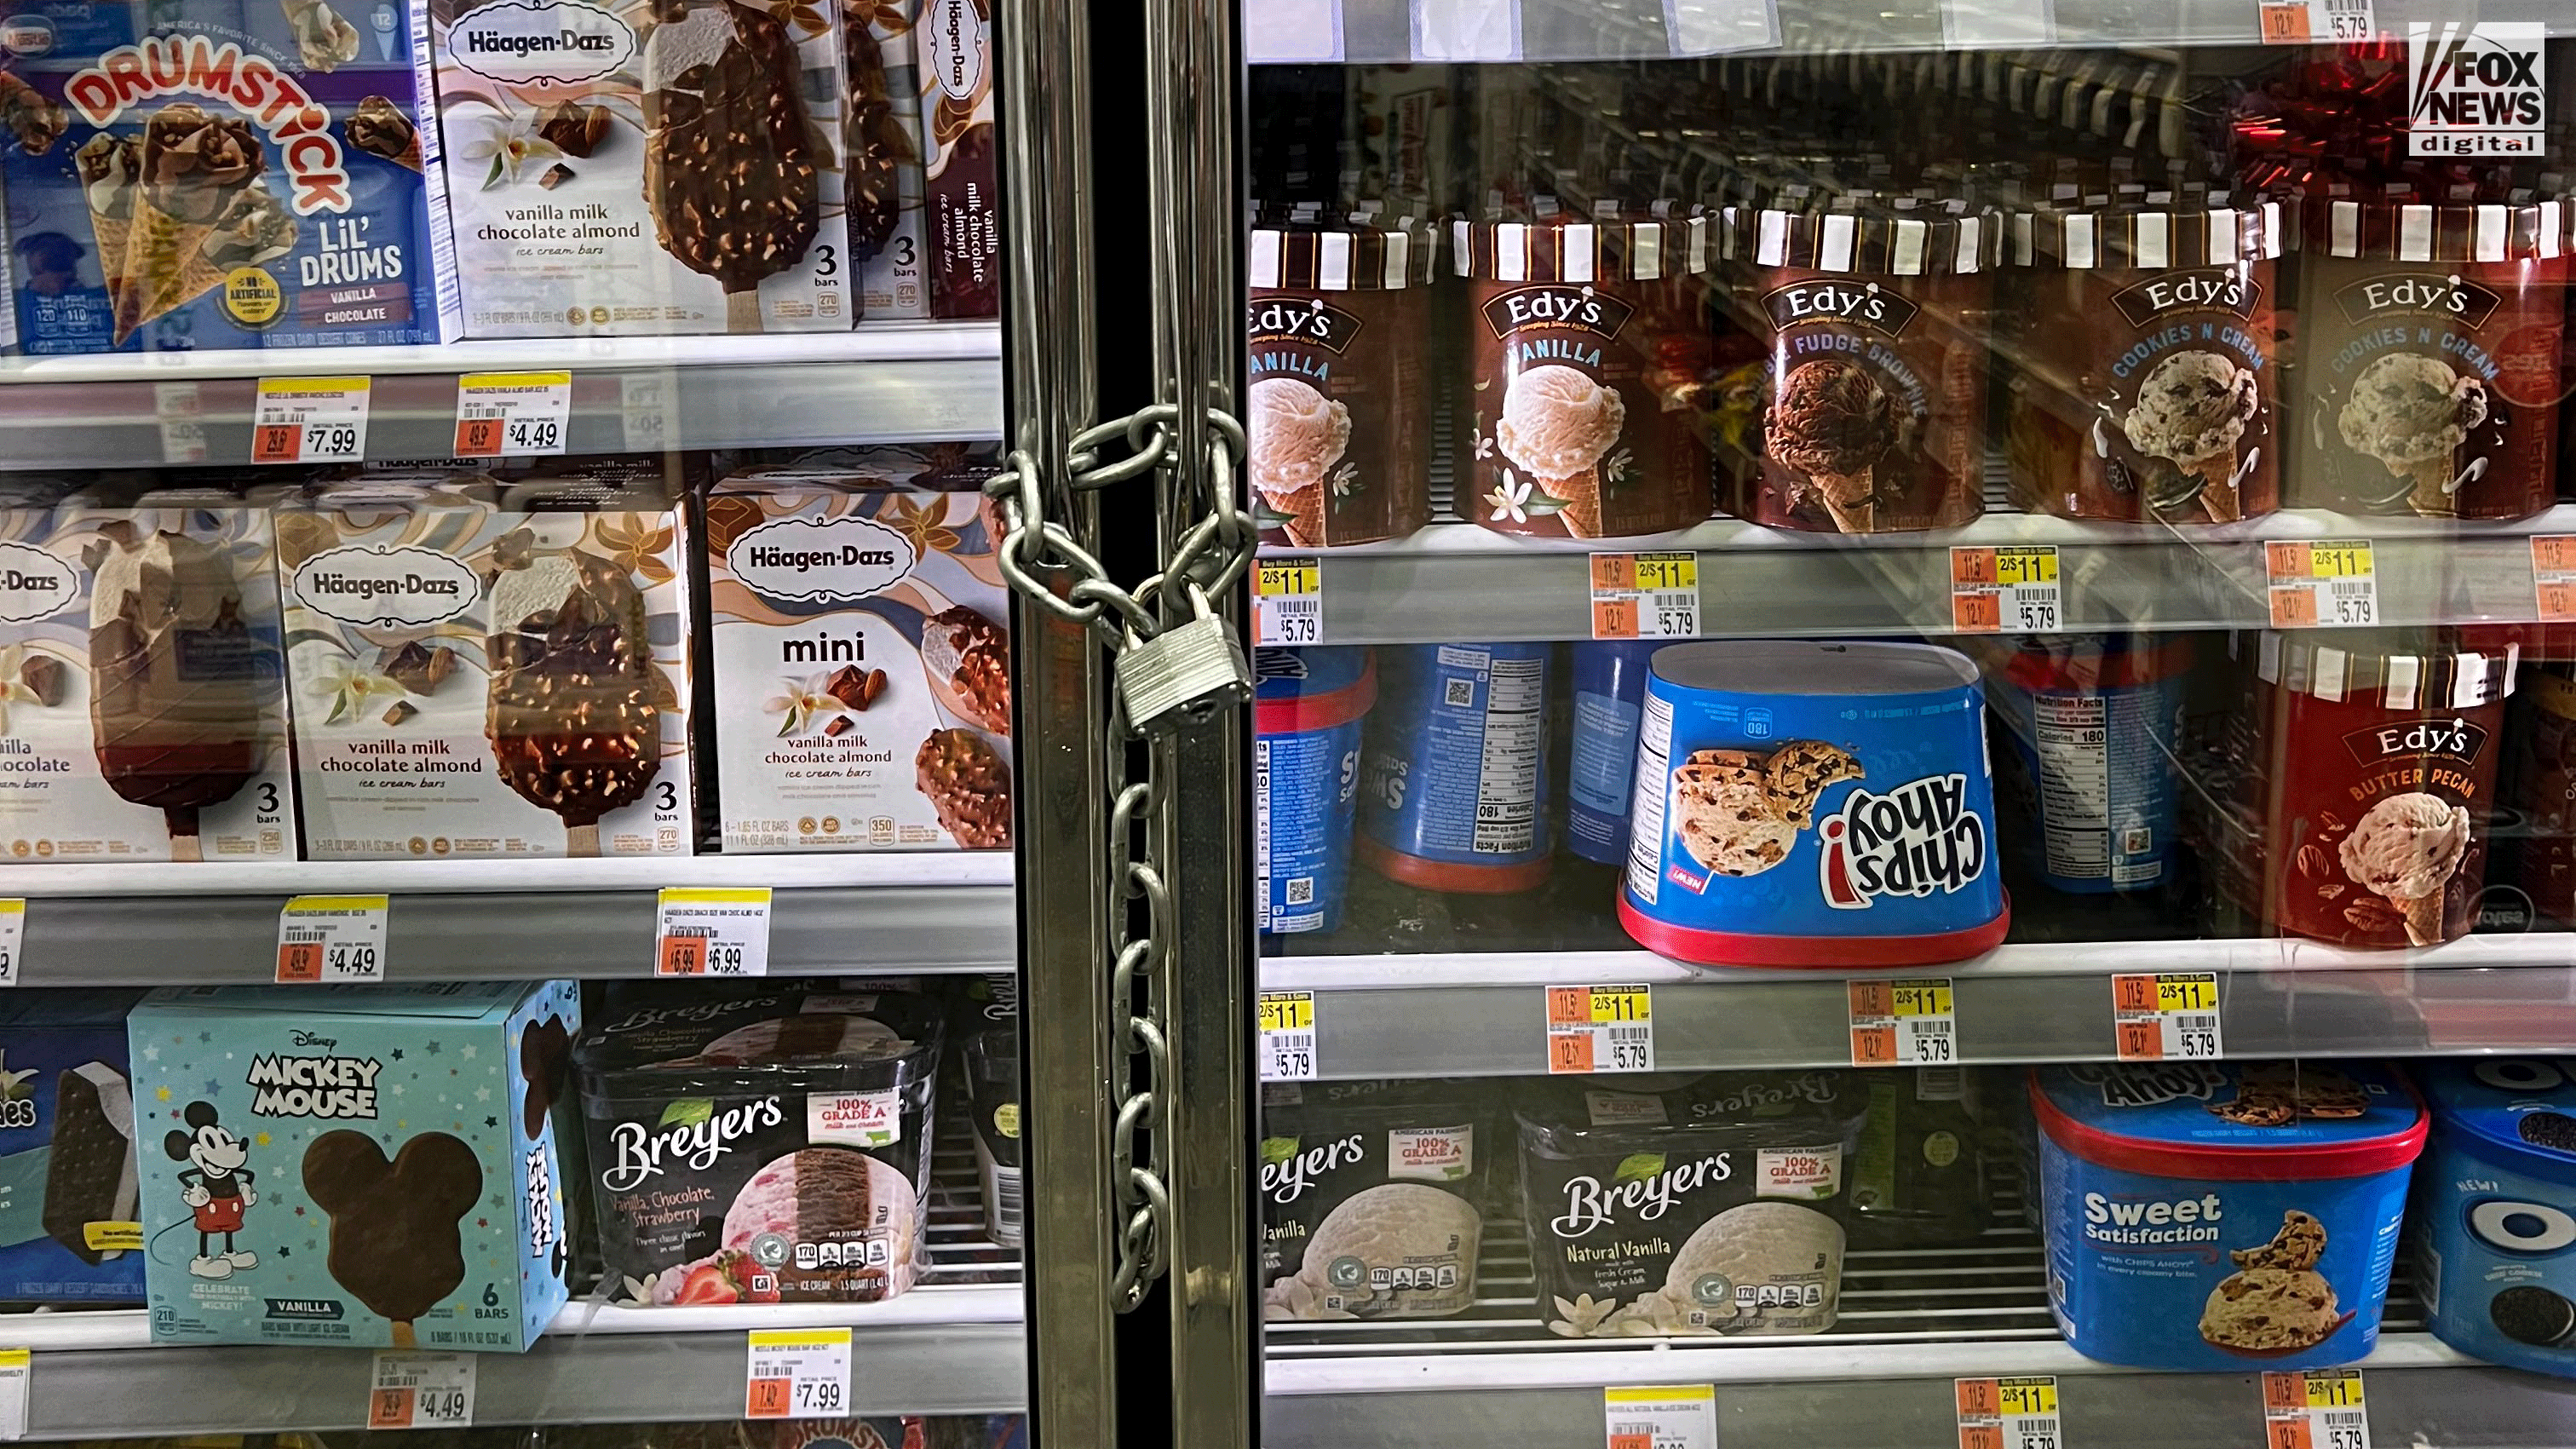 NYC Walgreens store keeping ice cream in chained freezer, locking